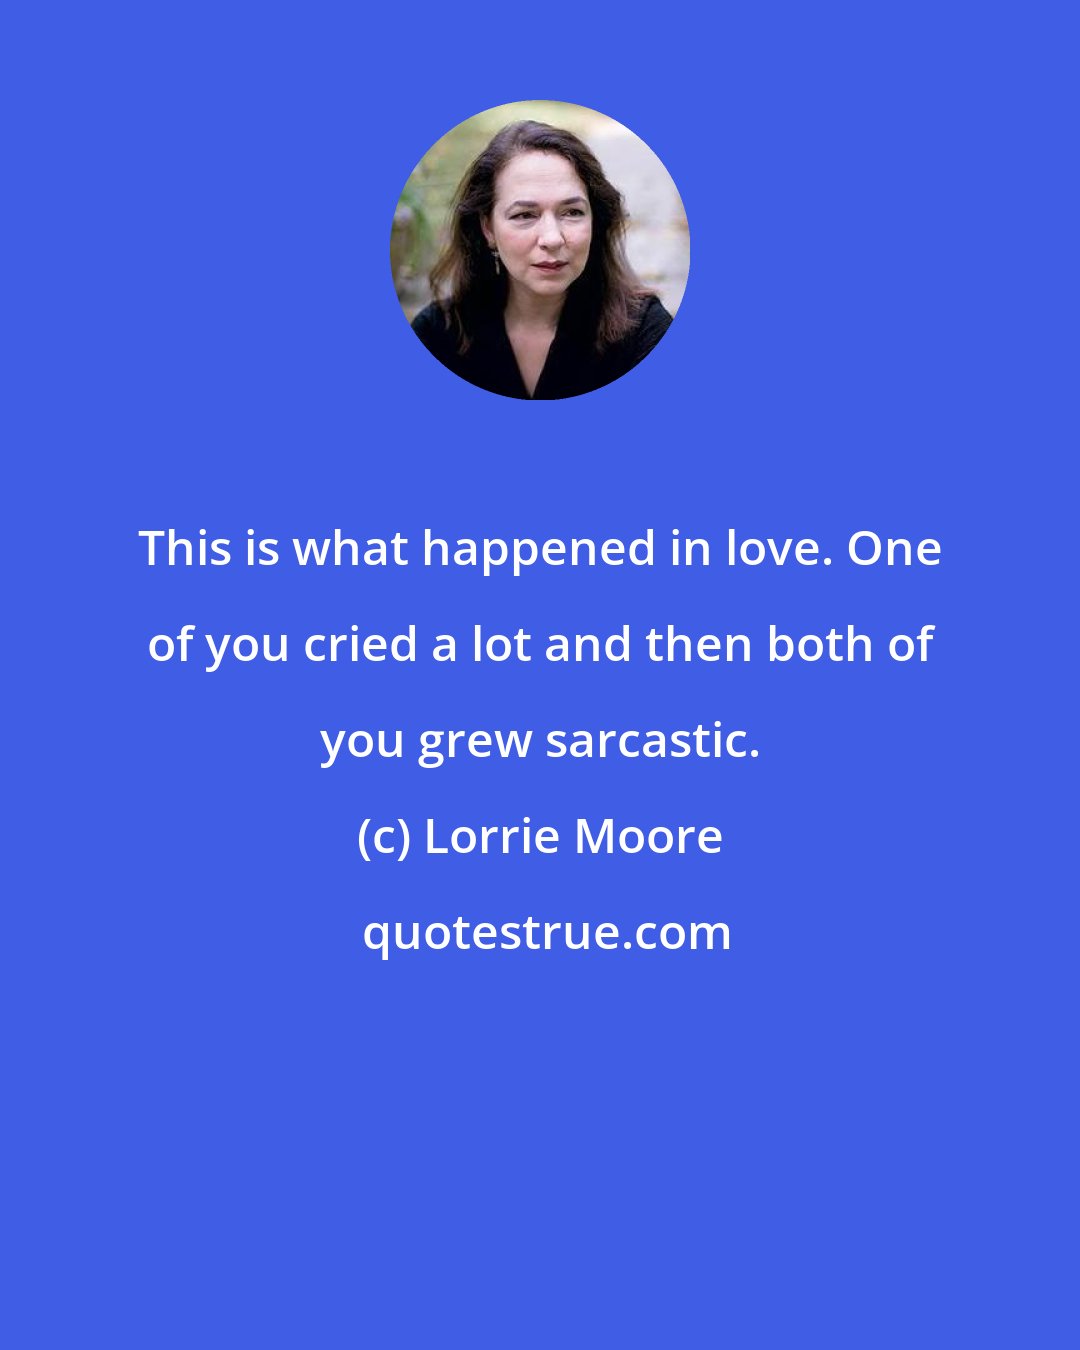 Lorrie Moore: This is what happened in love. One of you cried a lot and then both of you grew sarcastic.